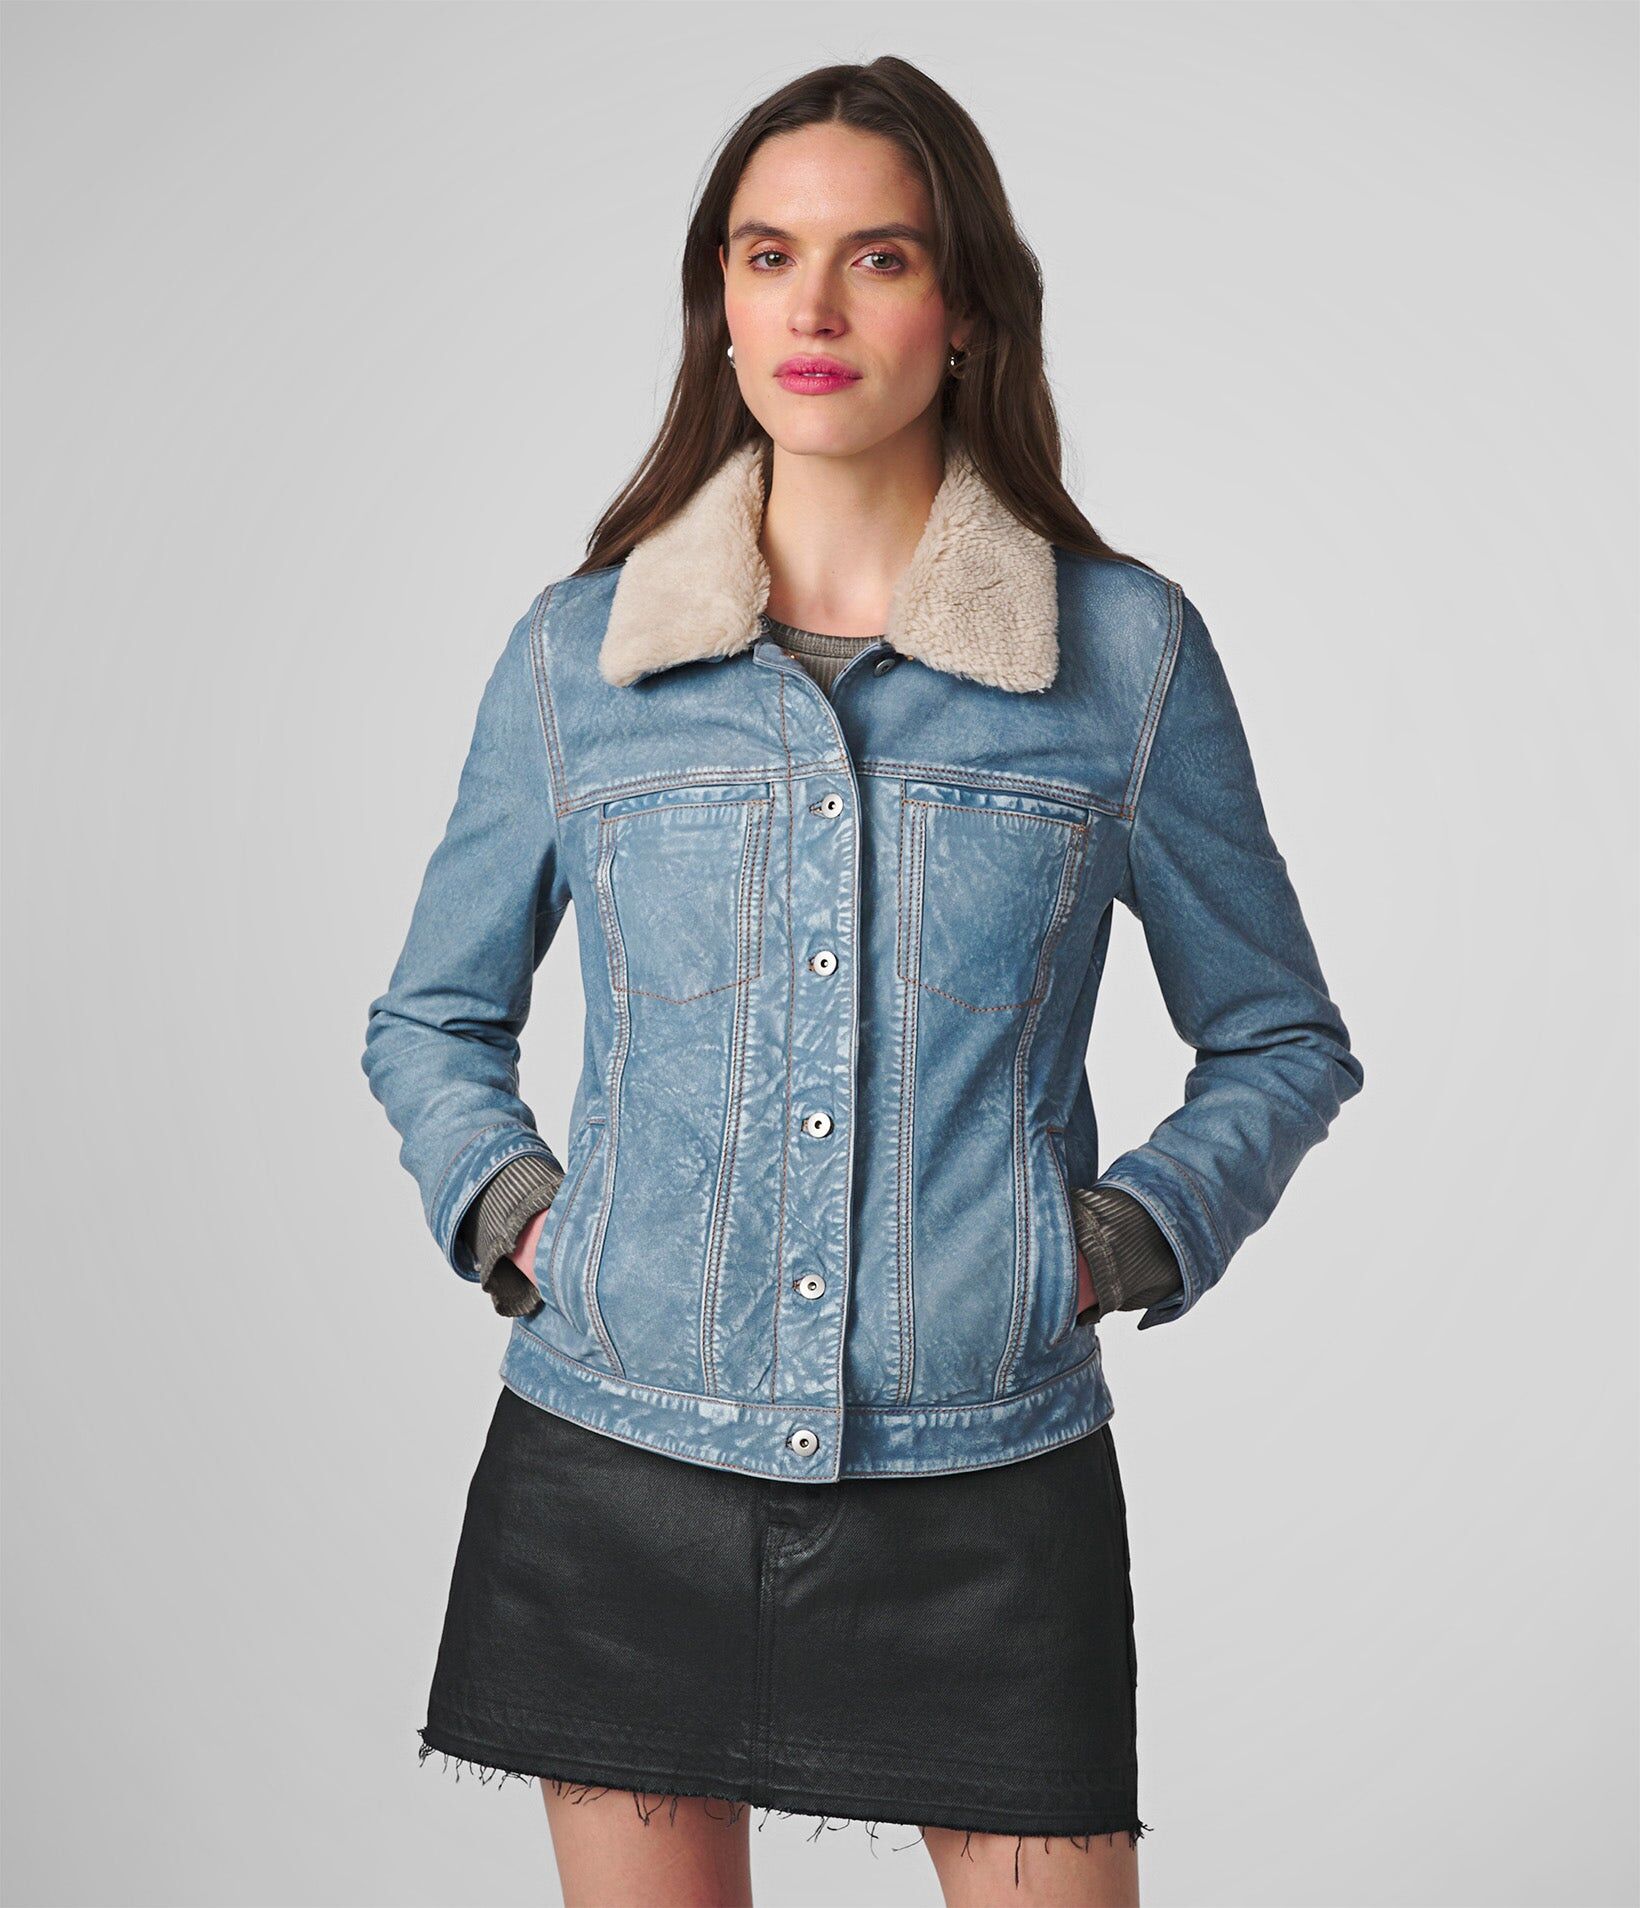 Wilsons Leather   Women's Harley Denim Leather Jacket With Shearling Collar   Light Blue   Small